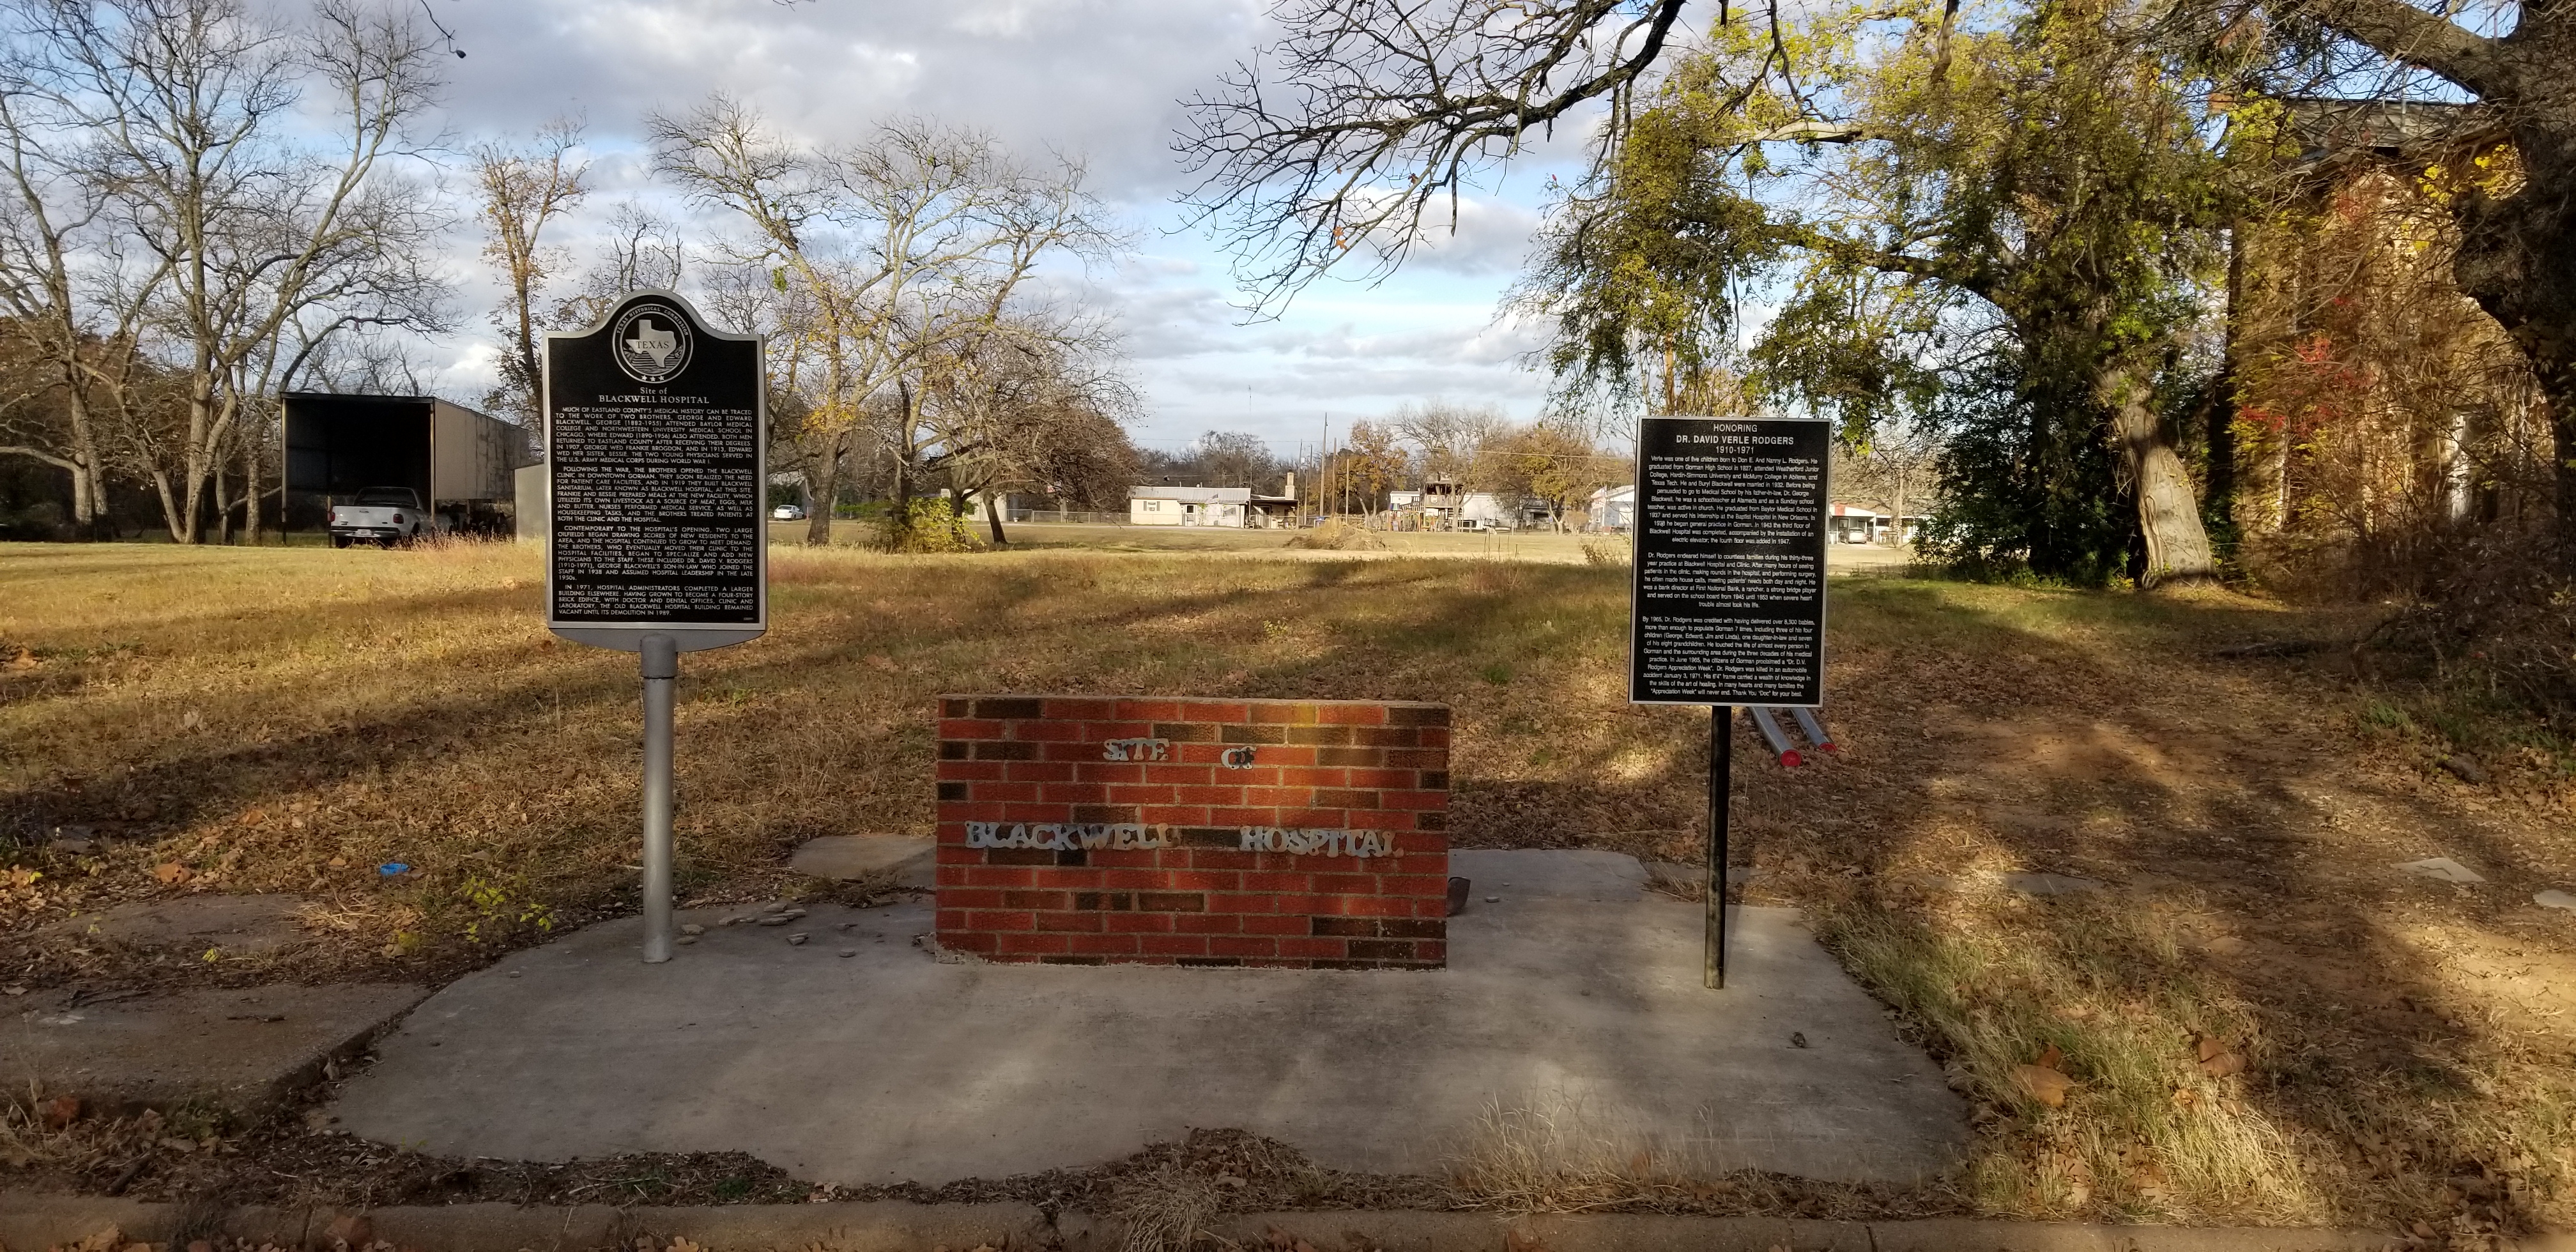 The Site of Blackwell Hospital Marker is on the left of the two markers.